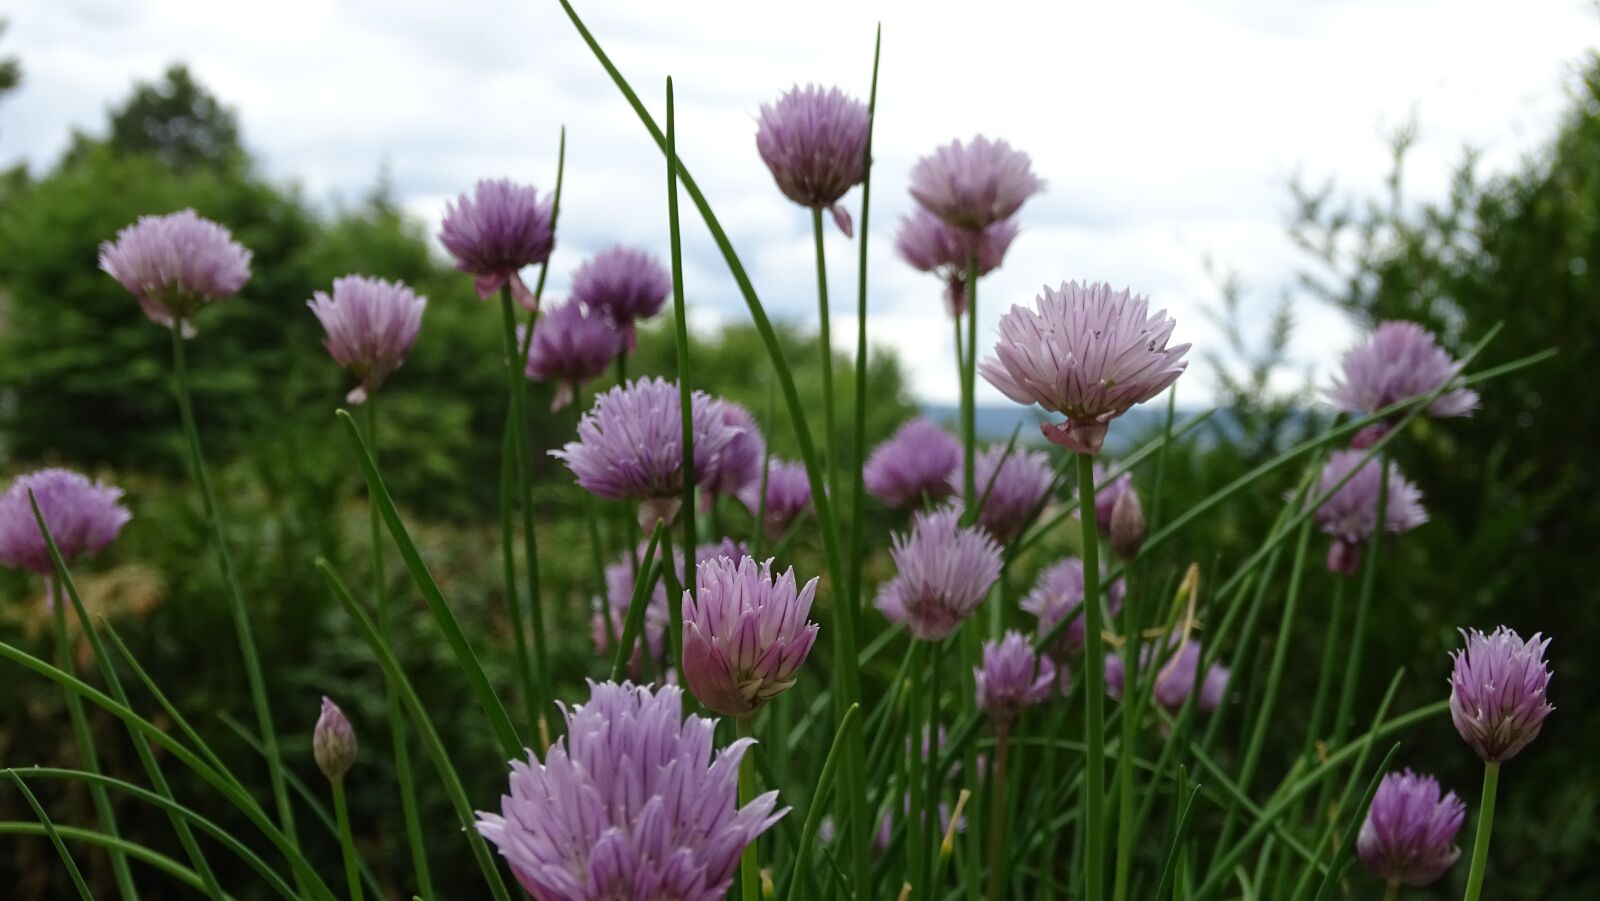 Sony Cyber-shot DSC-HX350 sample photo. Chives, blooms, chive flowers photography